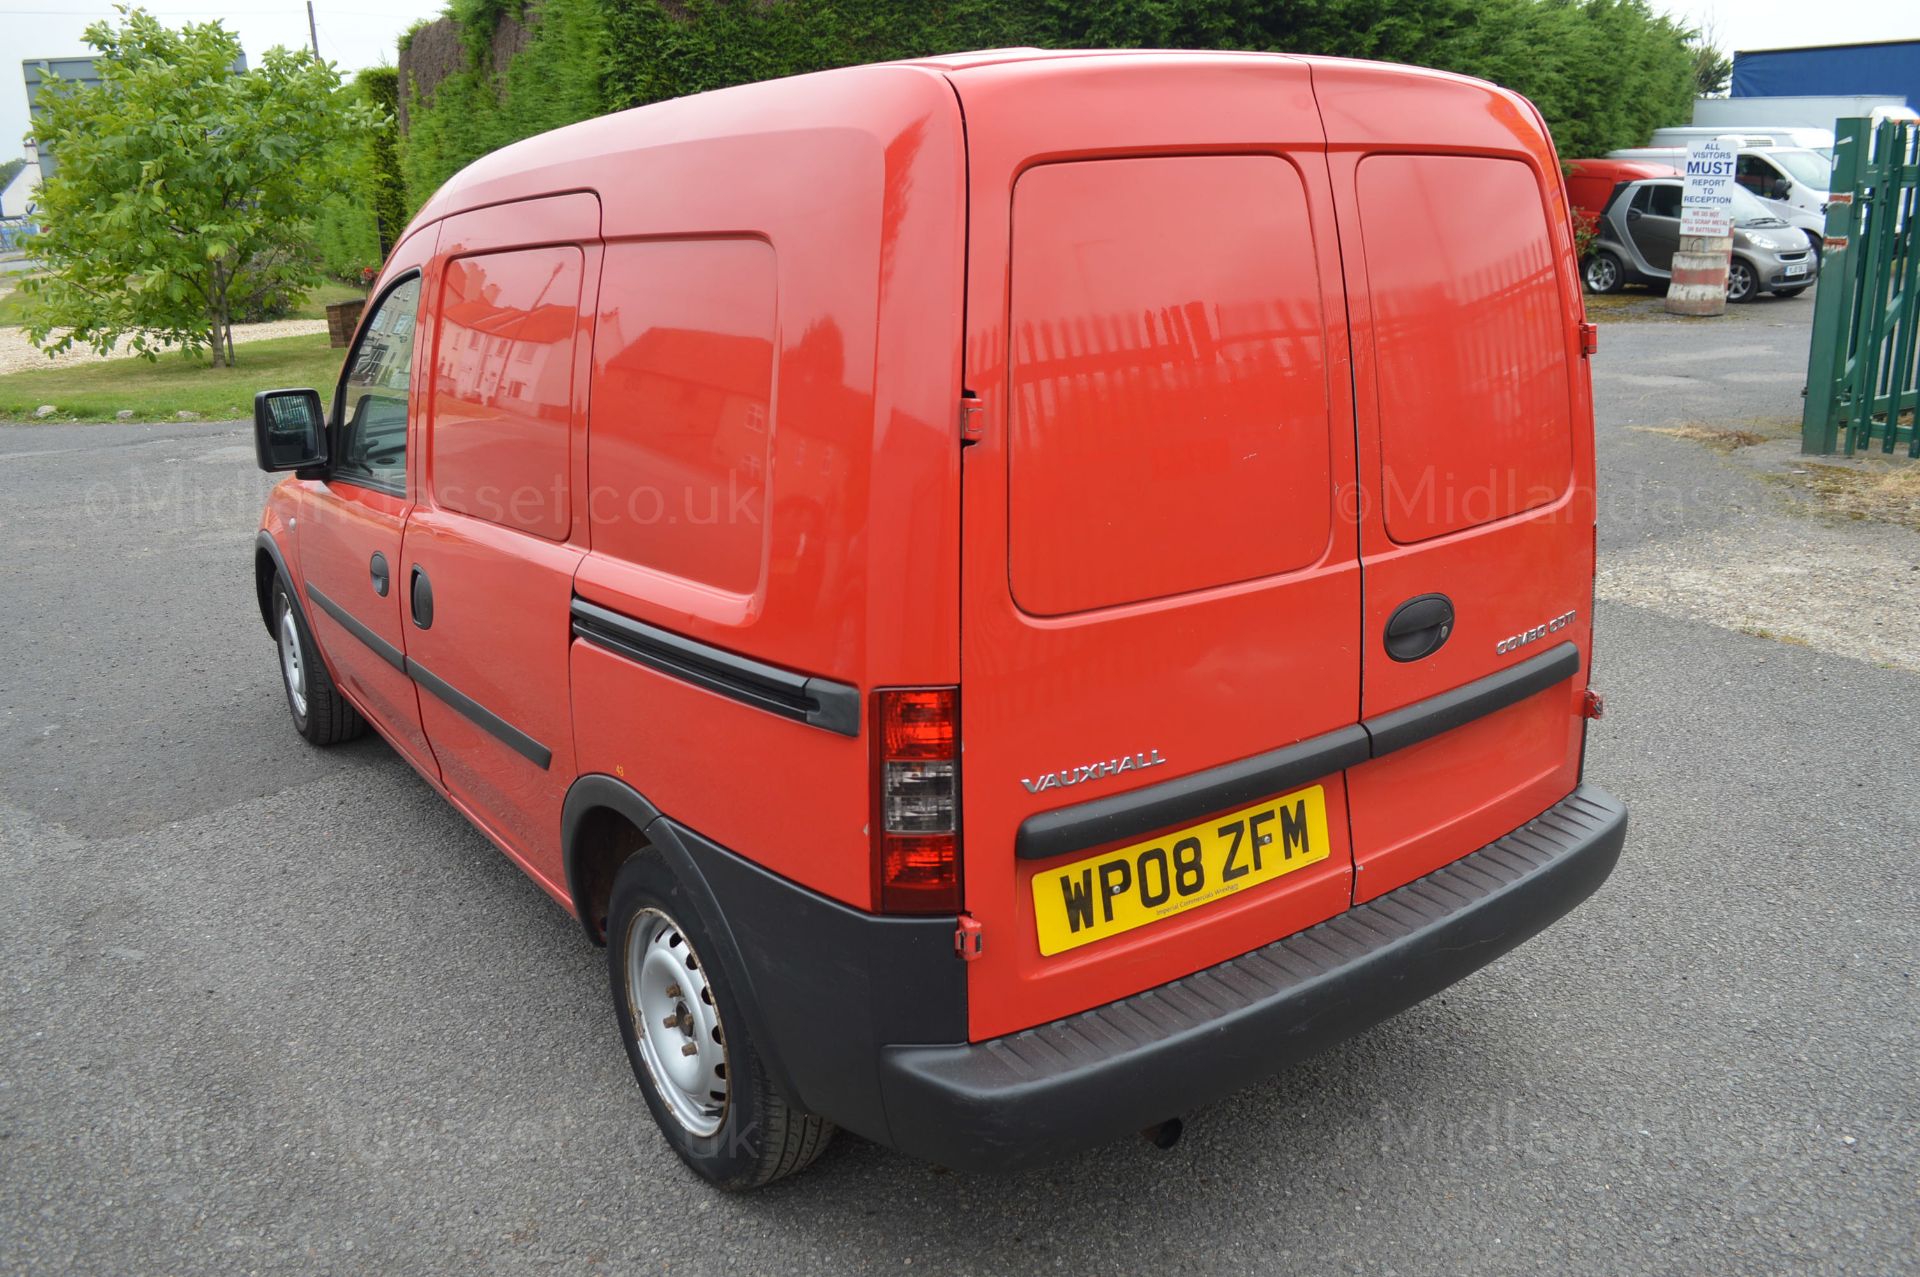 T - 2008/08 REG VAUXHALL COMBO 1700 CDTI CAR DERIVED VAN ONE OWNER - ROYAL MAIL *NO VAT* - Image 4 of 17